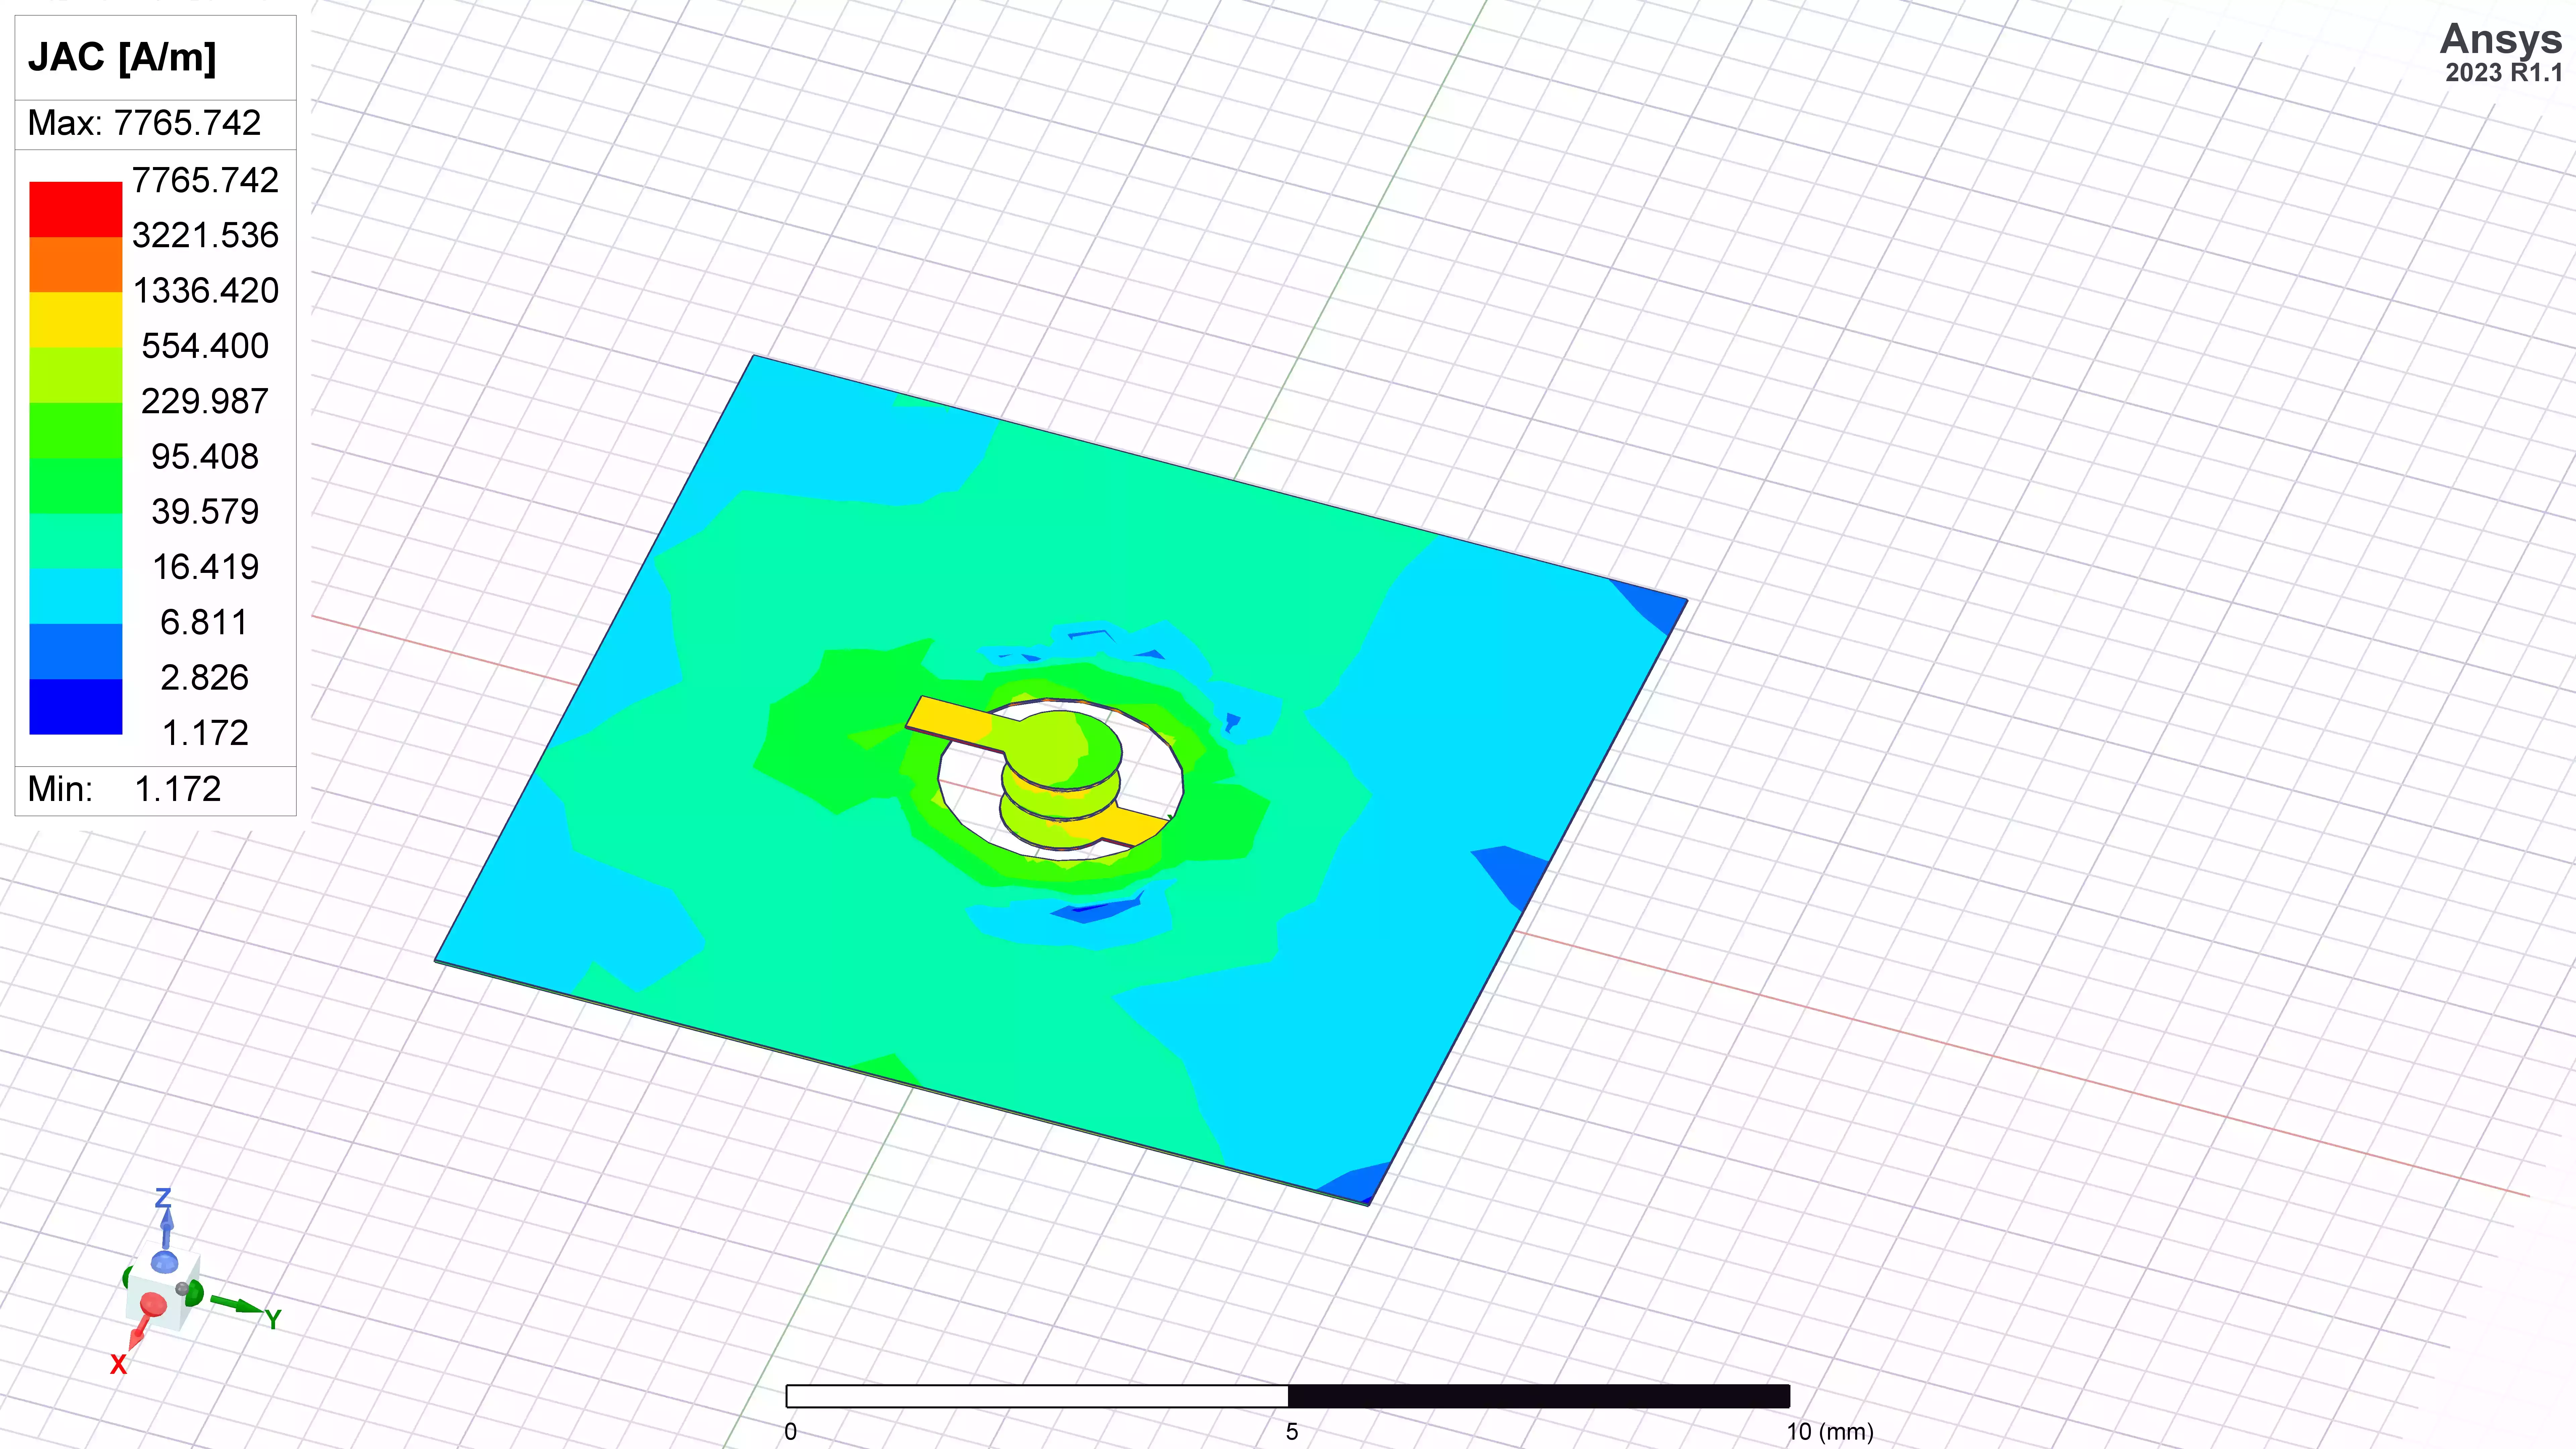 Ansys Q3D Extractor